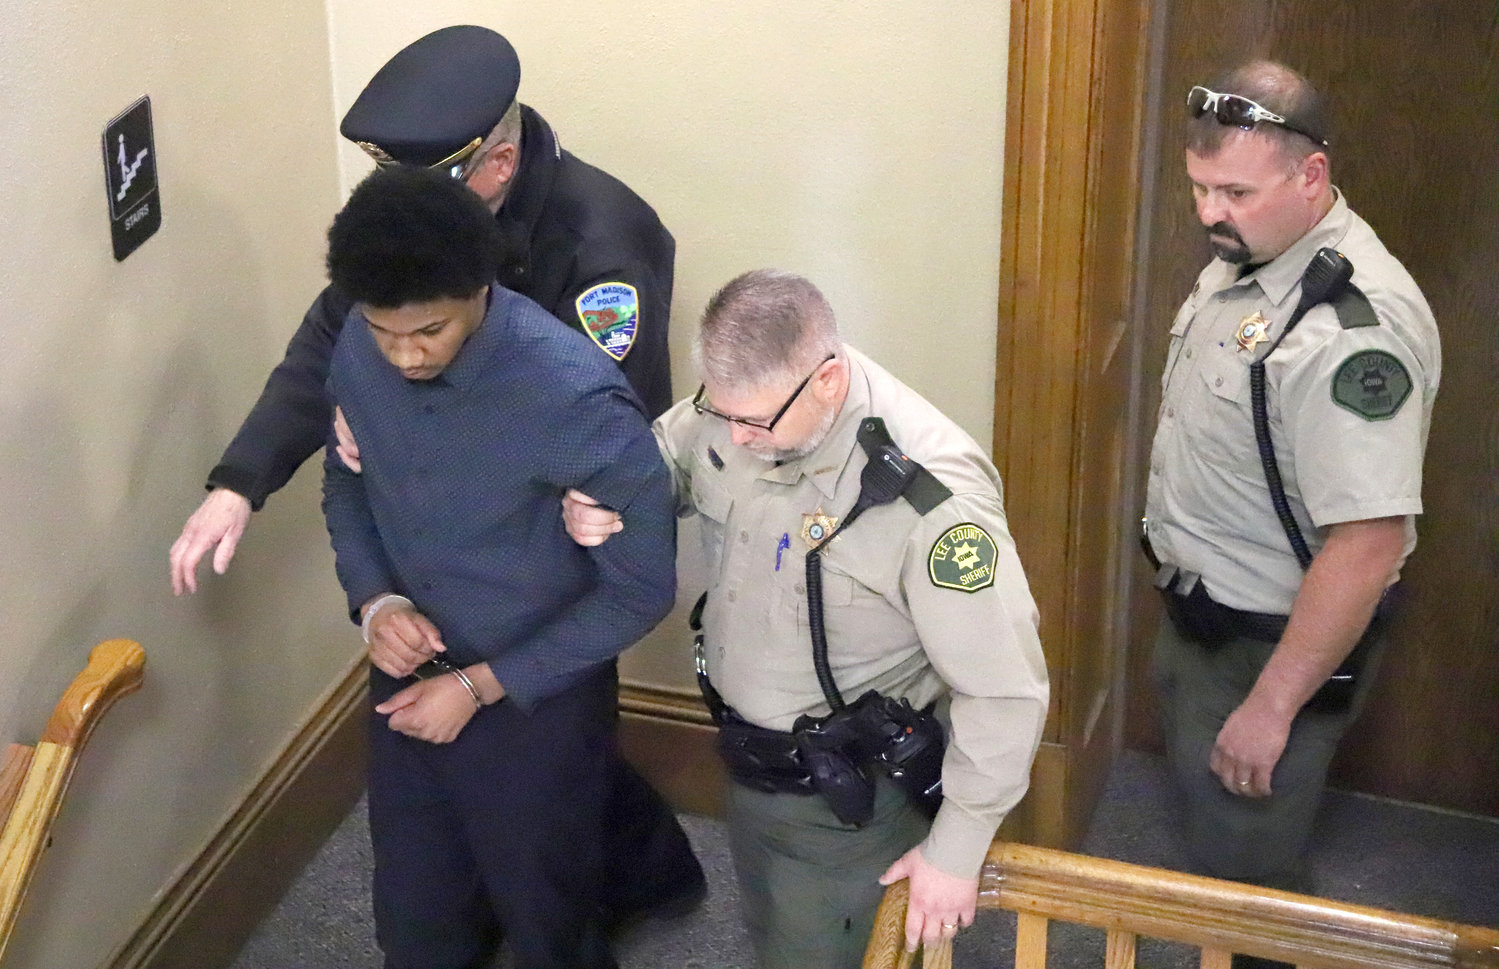 Dimari Meredith is escorted from North Lee County Courthouse by Lee County Sheriff Stacy Weber, Fort Madison Police Chief Mark Rohloff, and Lee County Jail Administrator John Canida Friday afternoon.